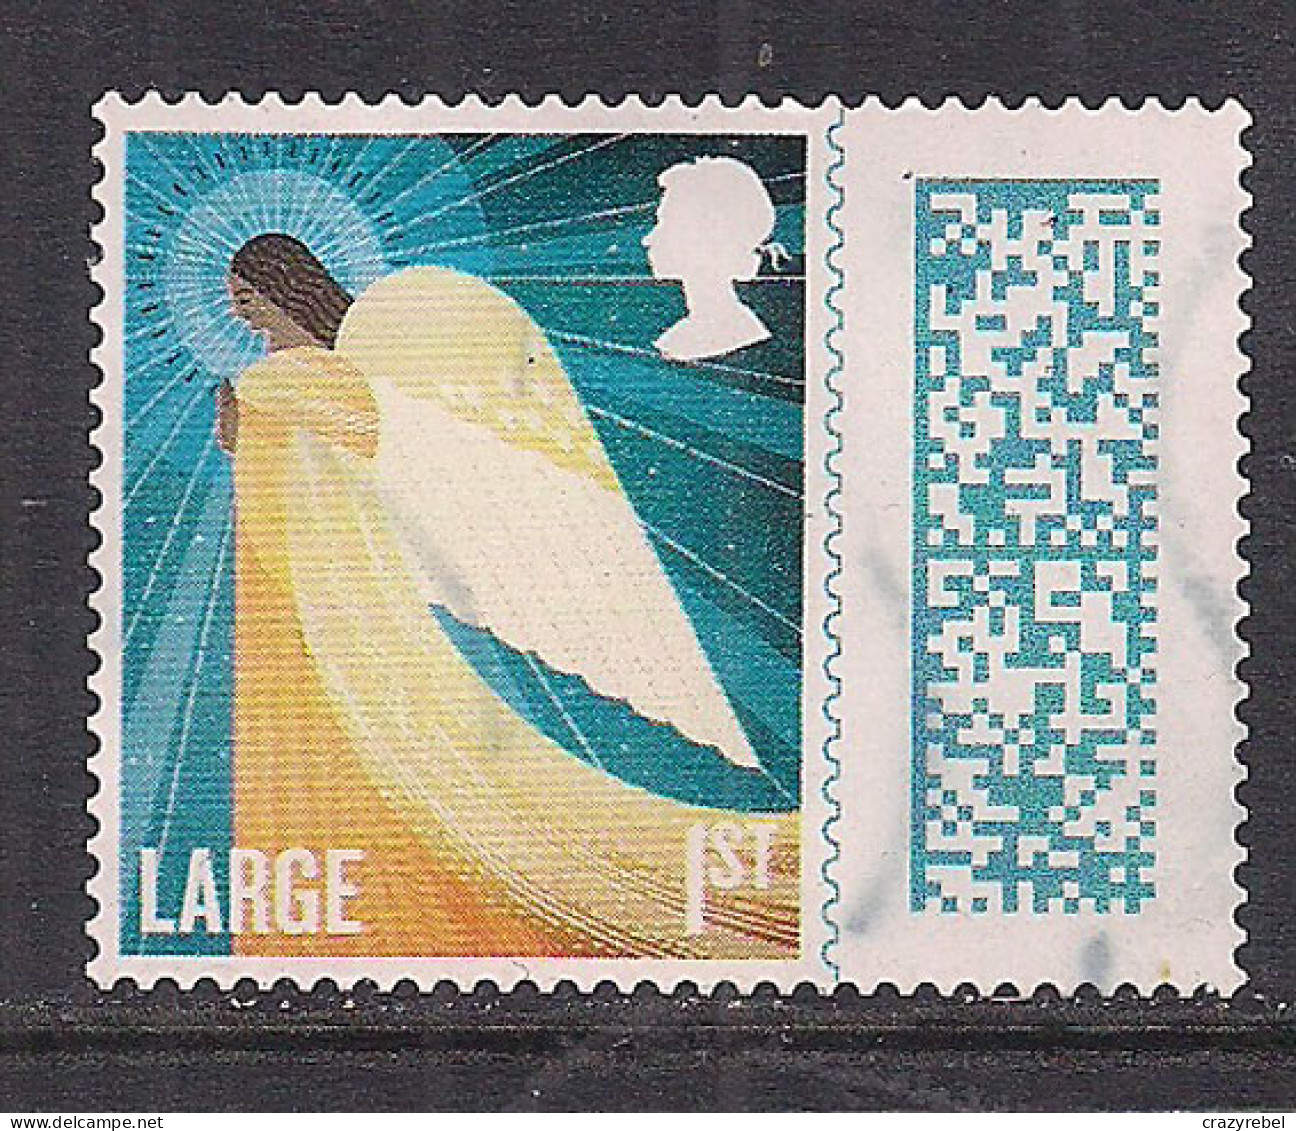 GB 2022 QE2 1st Large Christmas Angel Barcode Used SG 4735 ( E1026 ) - Oblitérés